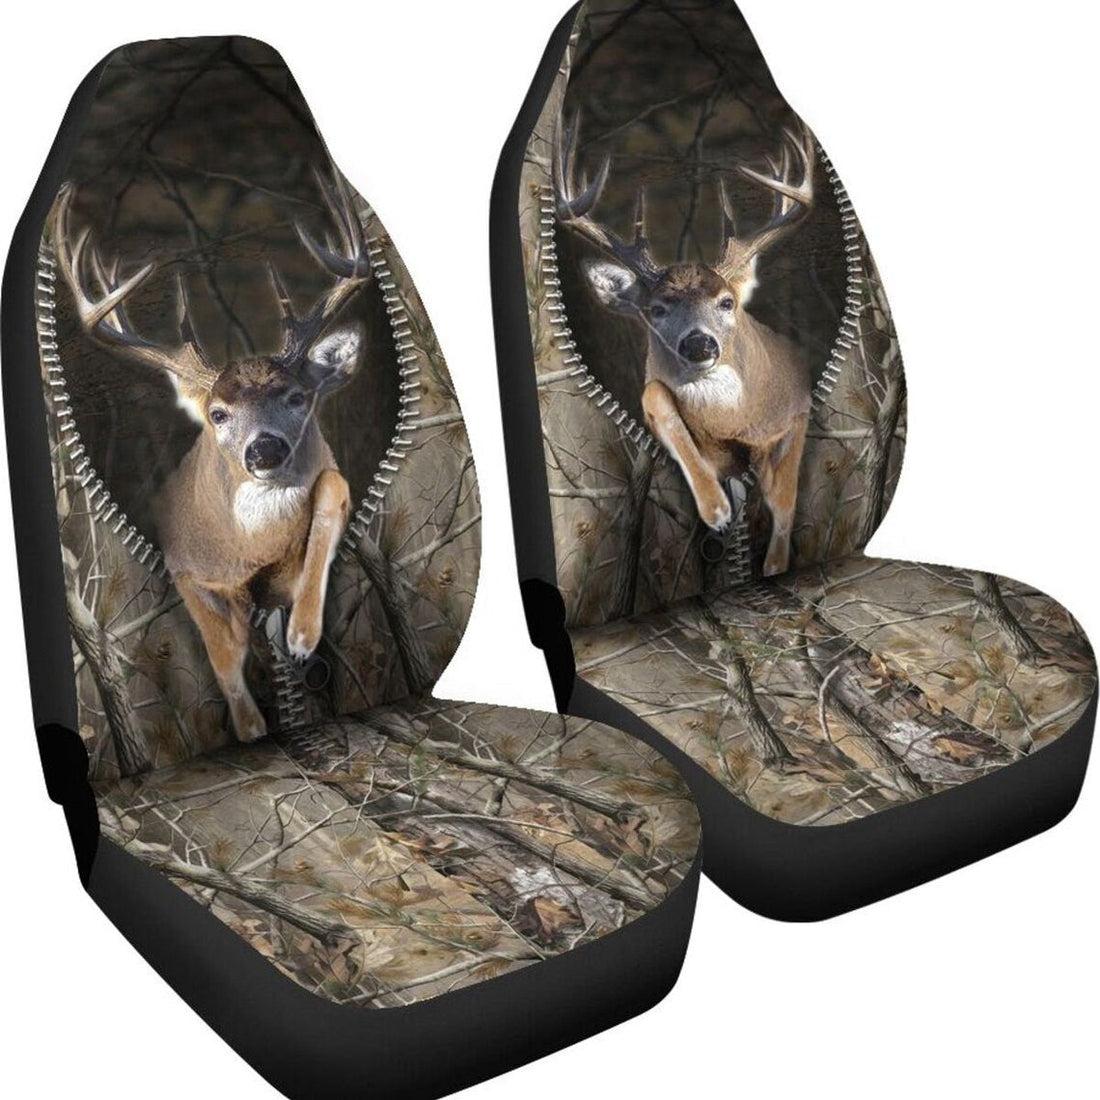 3D All Over Printed Deer Hunting Zipper Camo Car Seat Covers, Front Carseat Cover With Deer Hunting